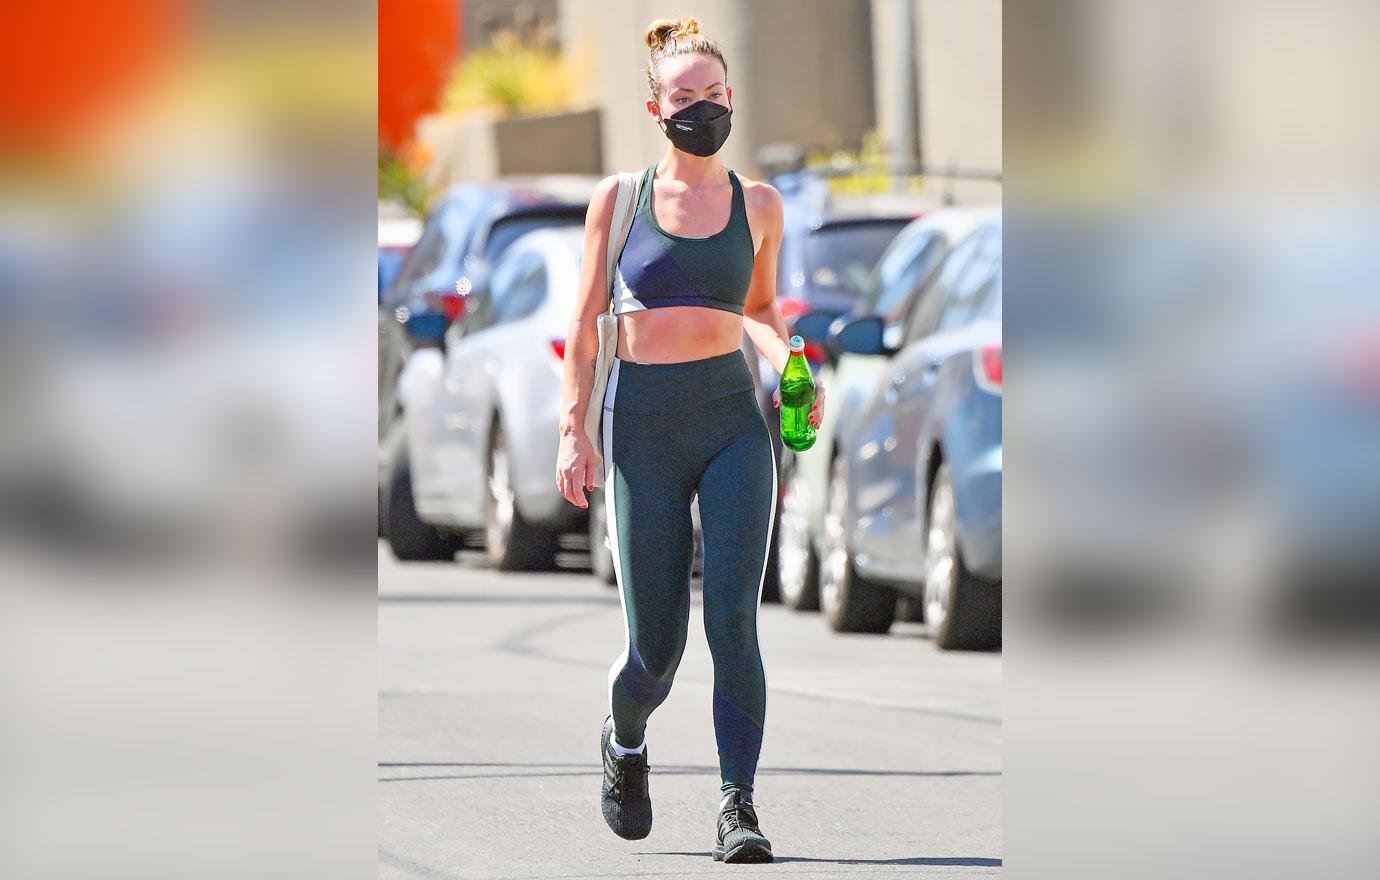 Olivia Wilde Leaves The Gym In Purple Leggings And A Low-Cut Sports Bra